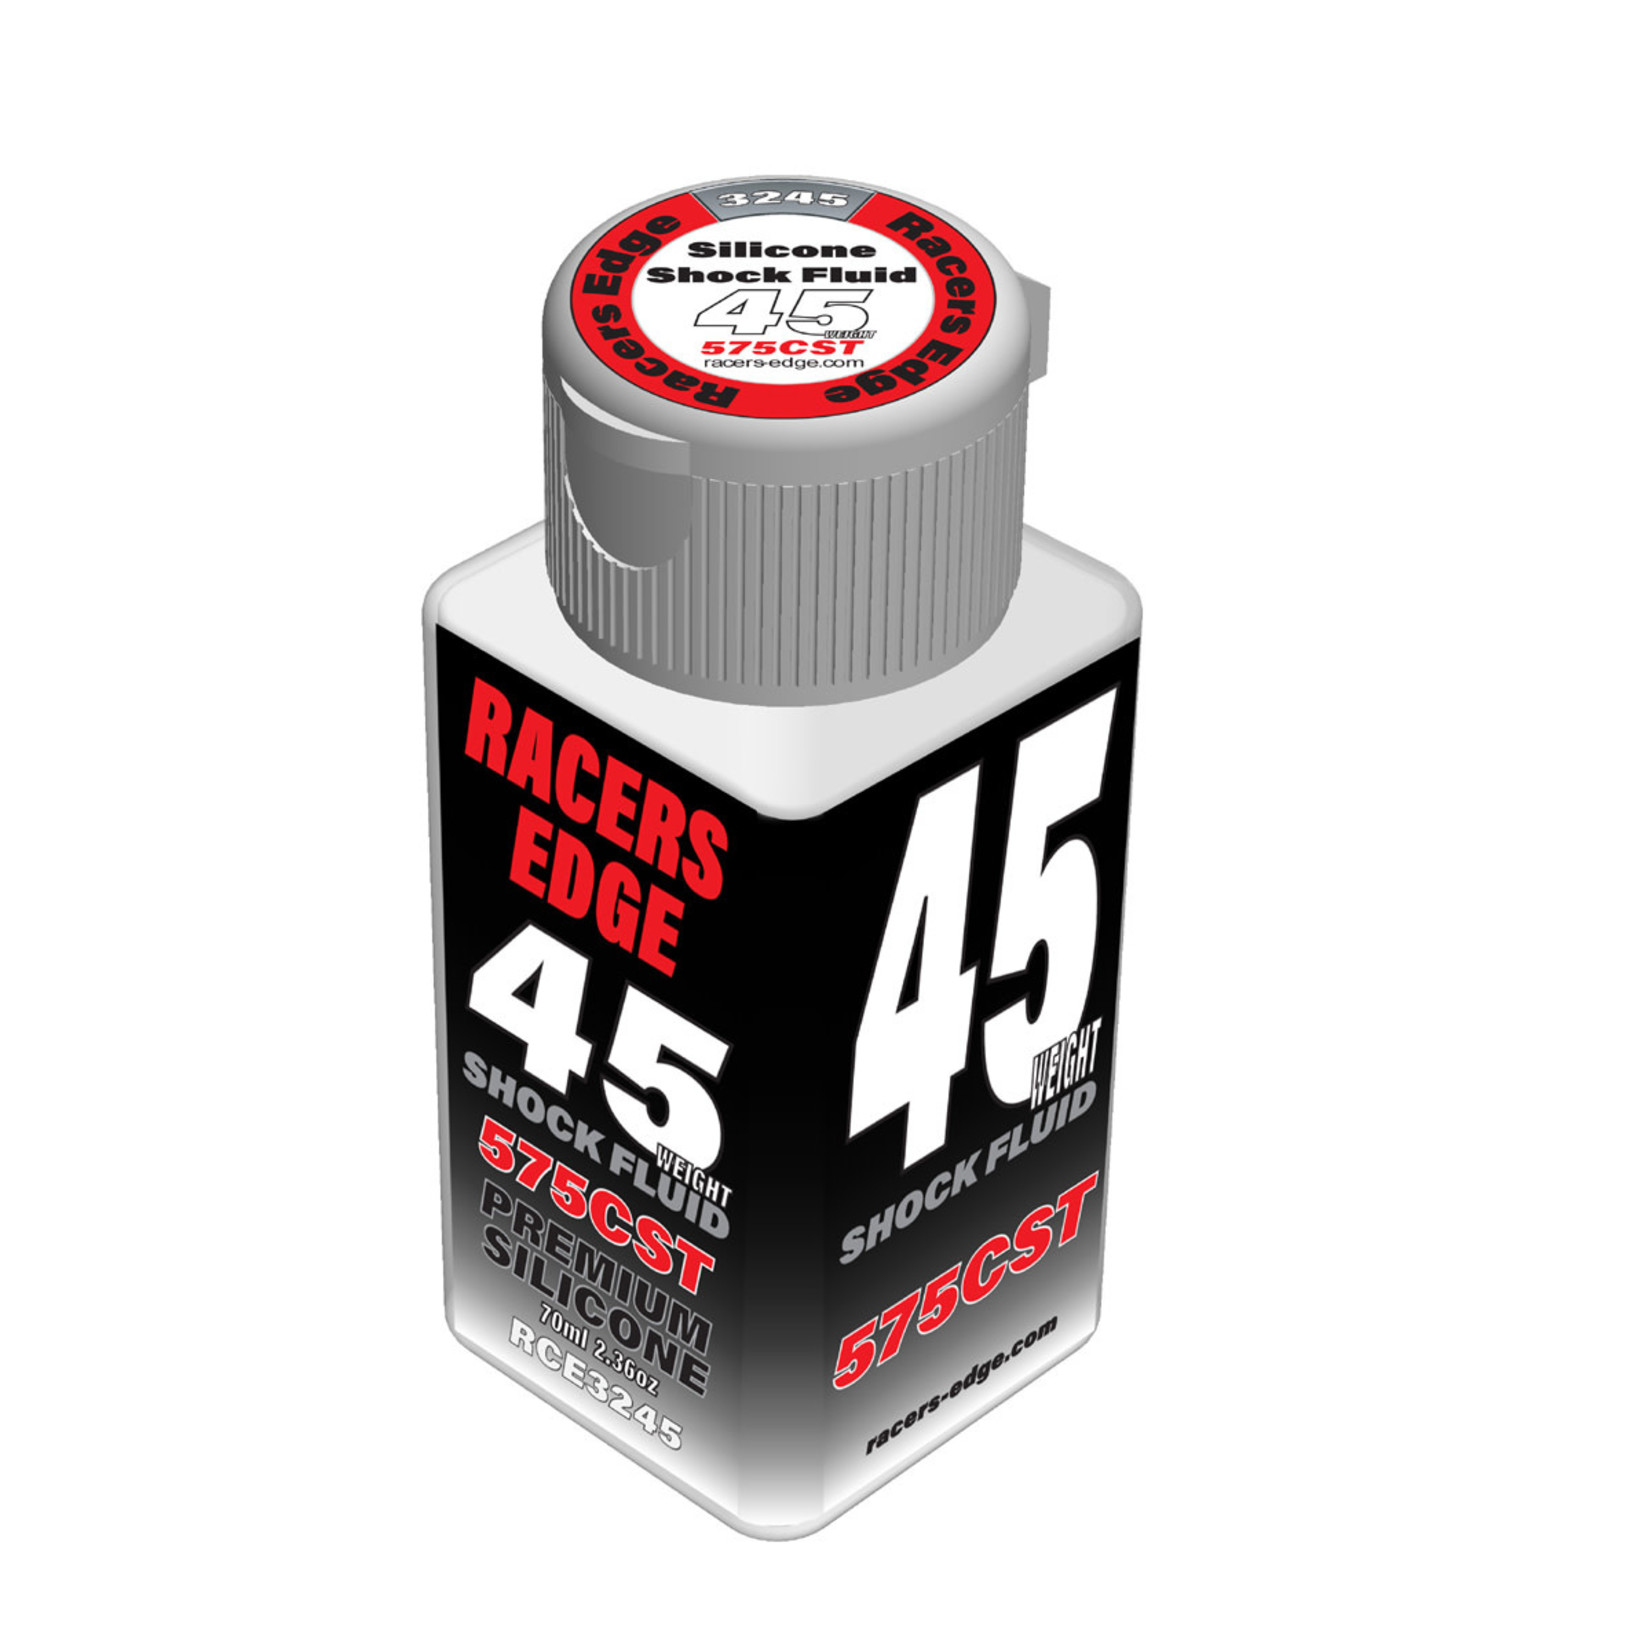 Racers Edge 45 Weight, 575cSt, 70ml 2.36oz Pure Silicone Shock Oil